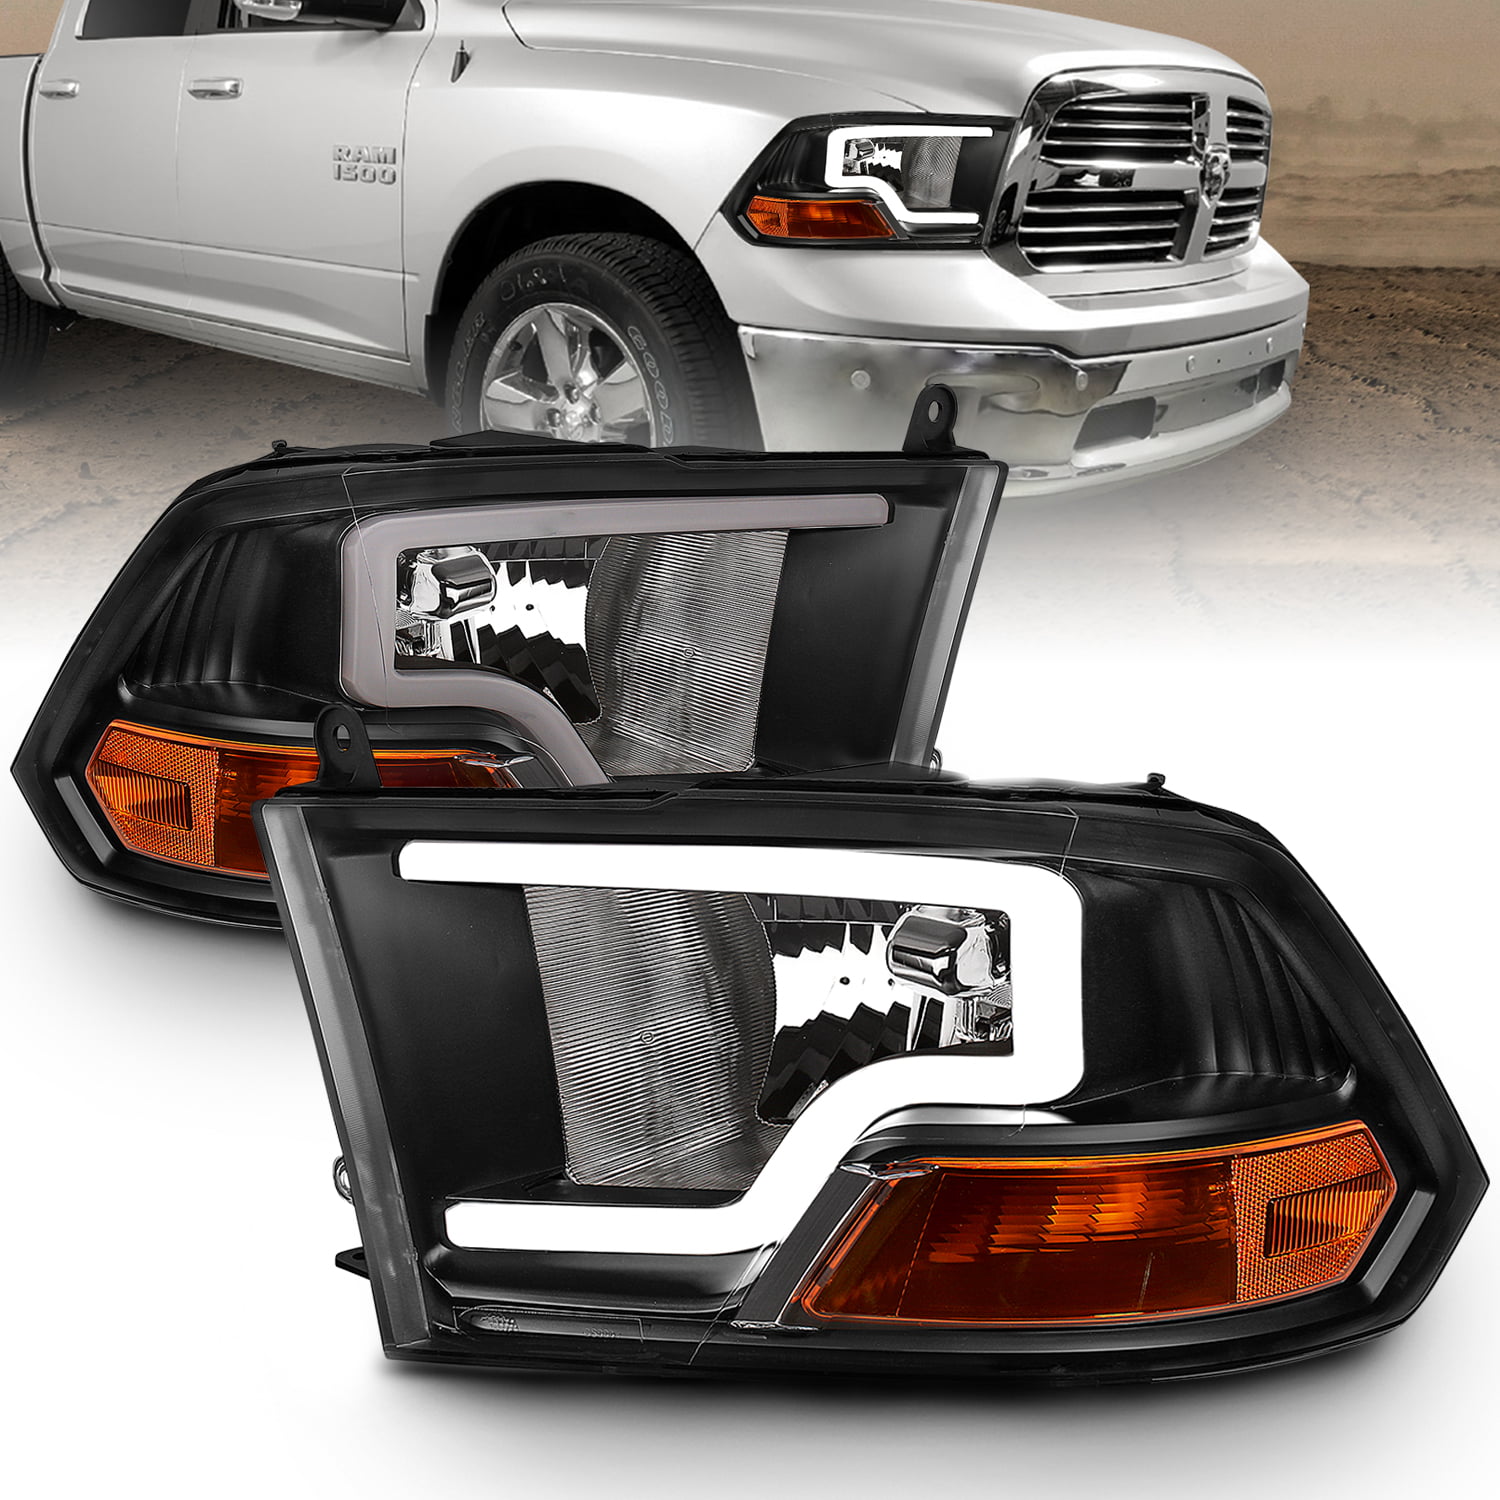 -Black Driver side WITH install kit 6 inch LED 2006 Dodge RAM 2500-3500 W/O SIDE CURTAIN Door mount spotlight 